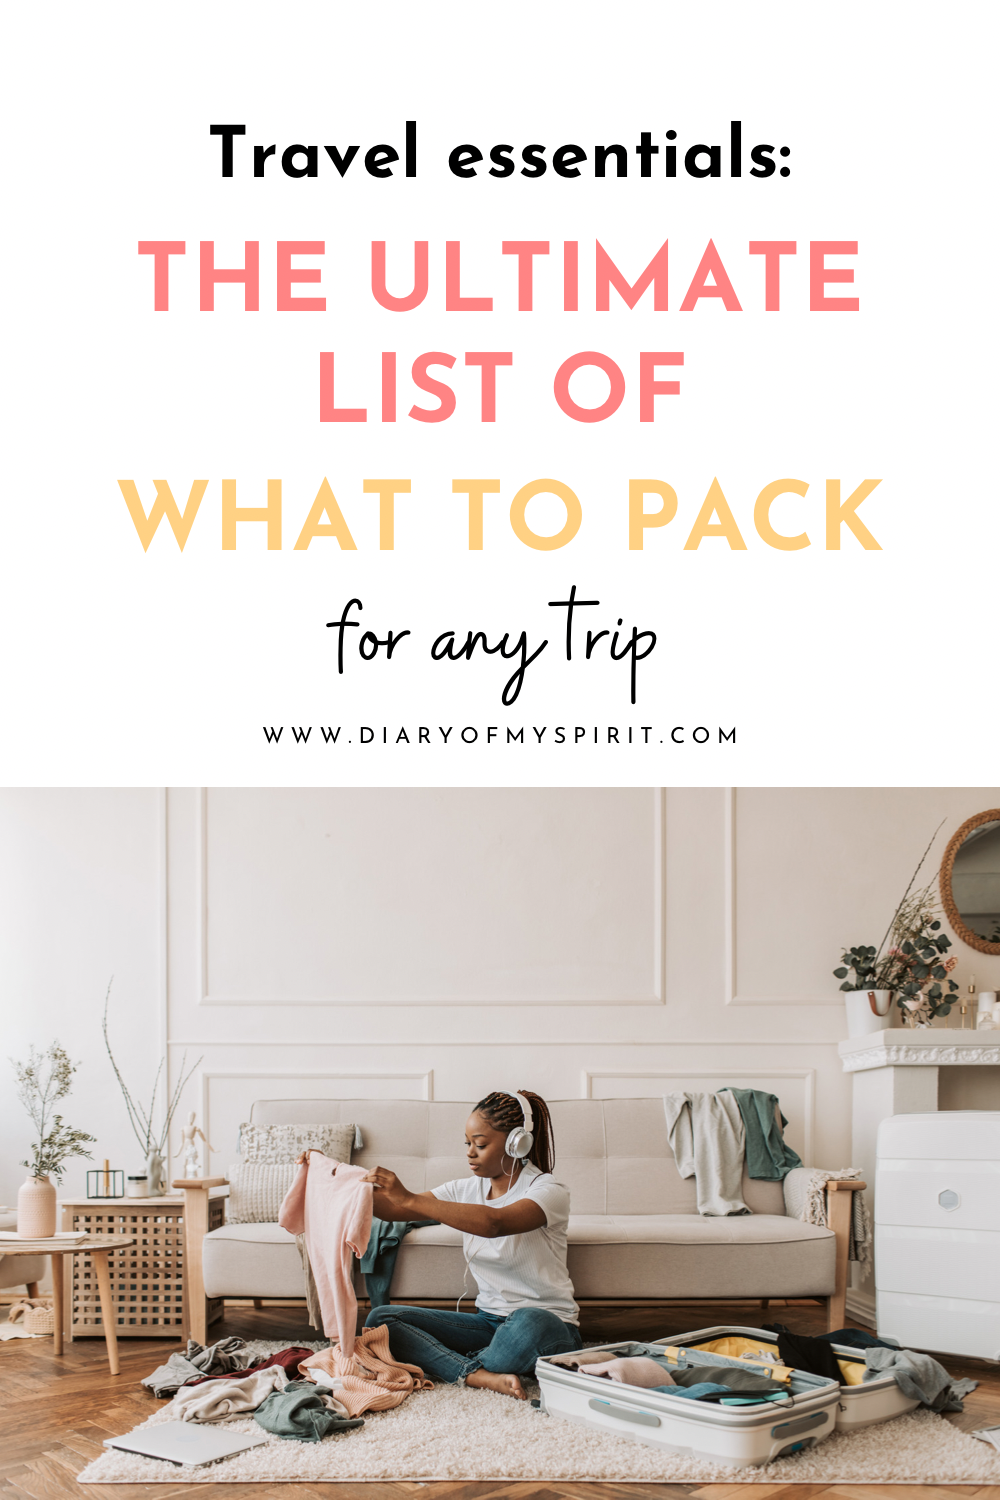 What should I bring on Vacation? Travel Essentials